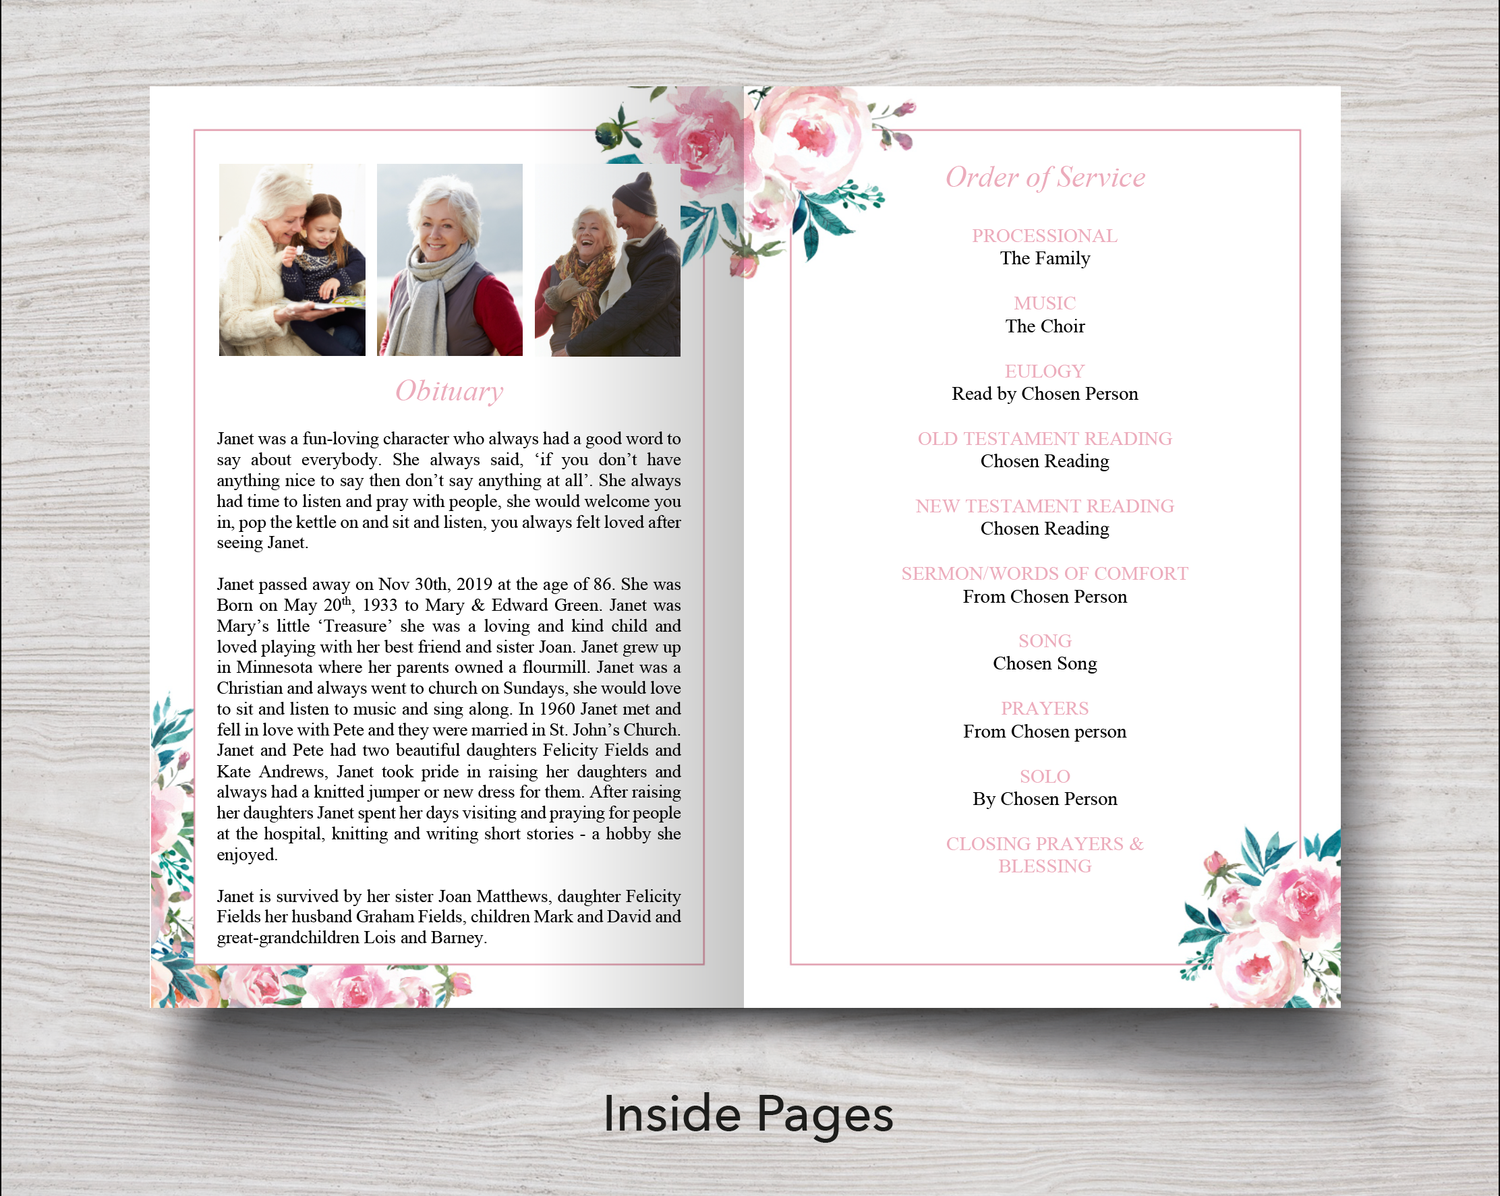 4 Page Peony Pink Funeral Program Template